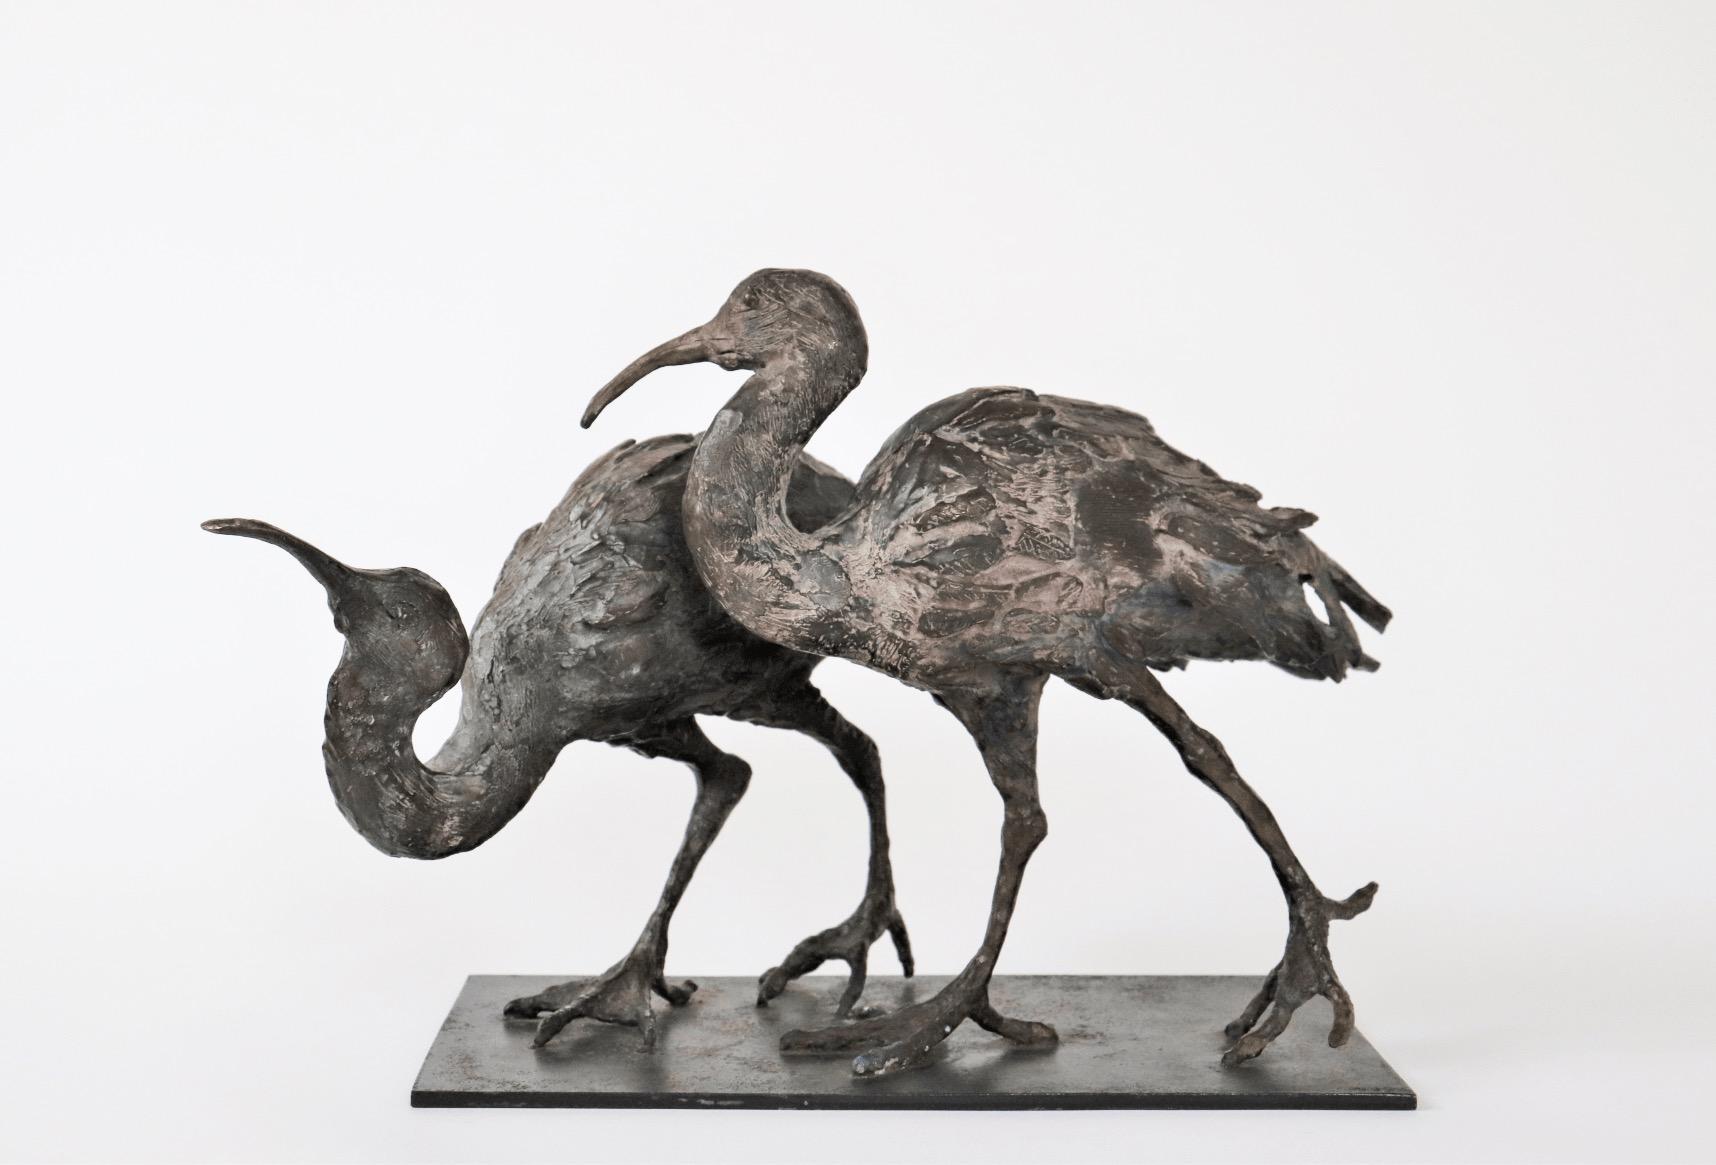 Two Ibises is a unique bronze sculpture by contemporary artist Chésade, dimensions are 25.5 × 38 × 21 cm (10 × 15 × 8.3 in). The sculpture is signed and comes with a certificate of authenticity.

The sculpture by Chésade is a part of this new